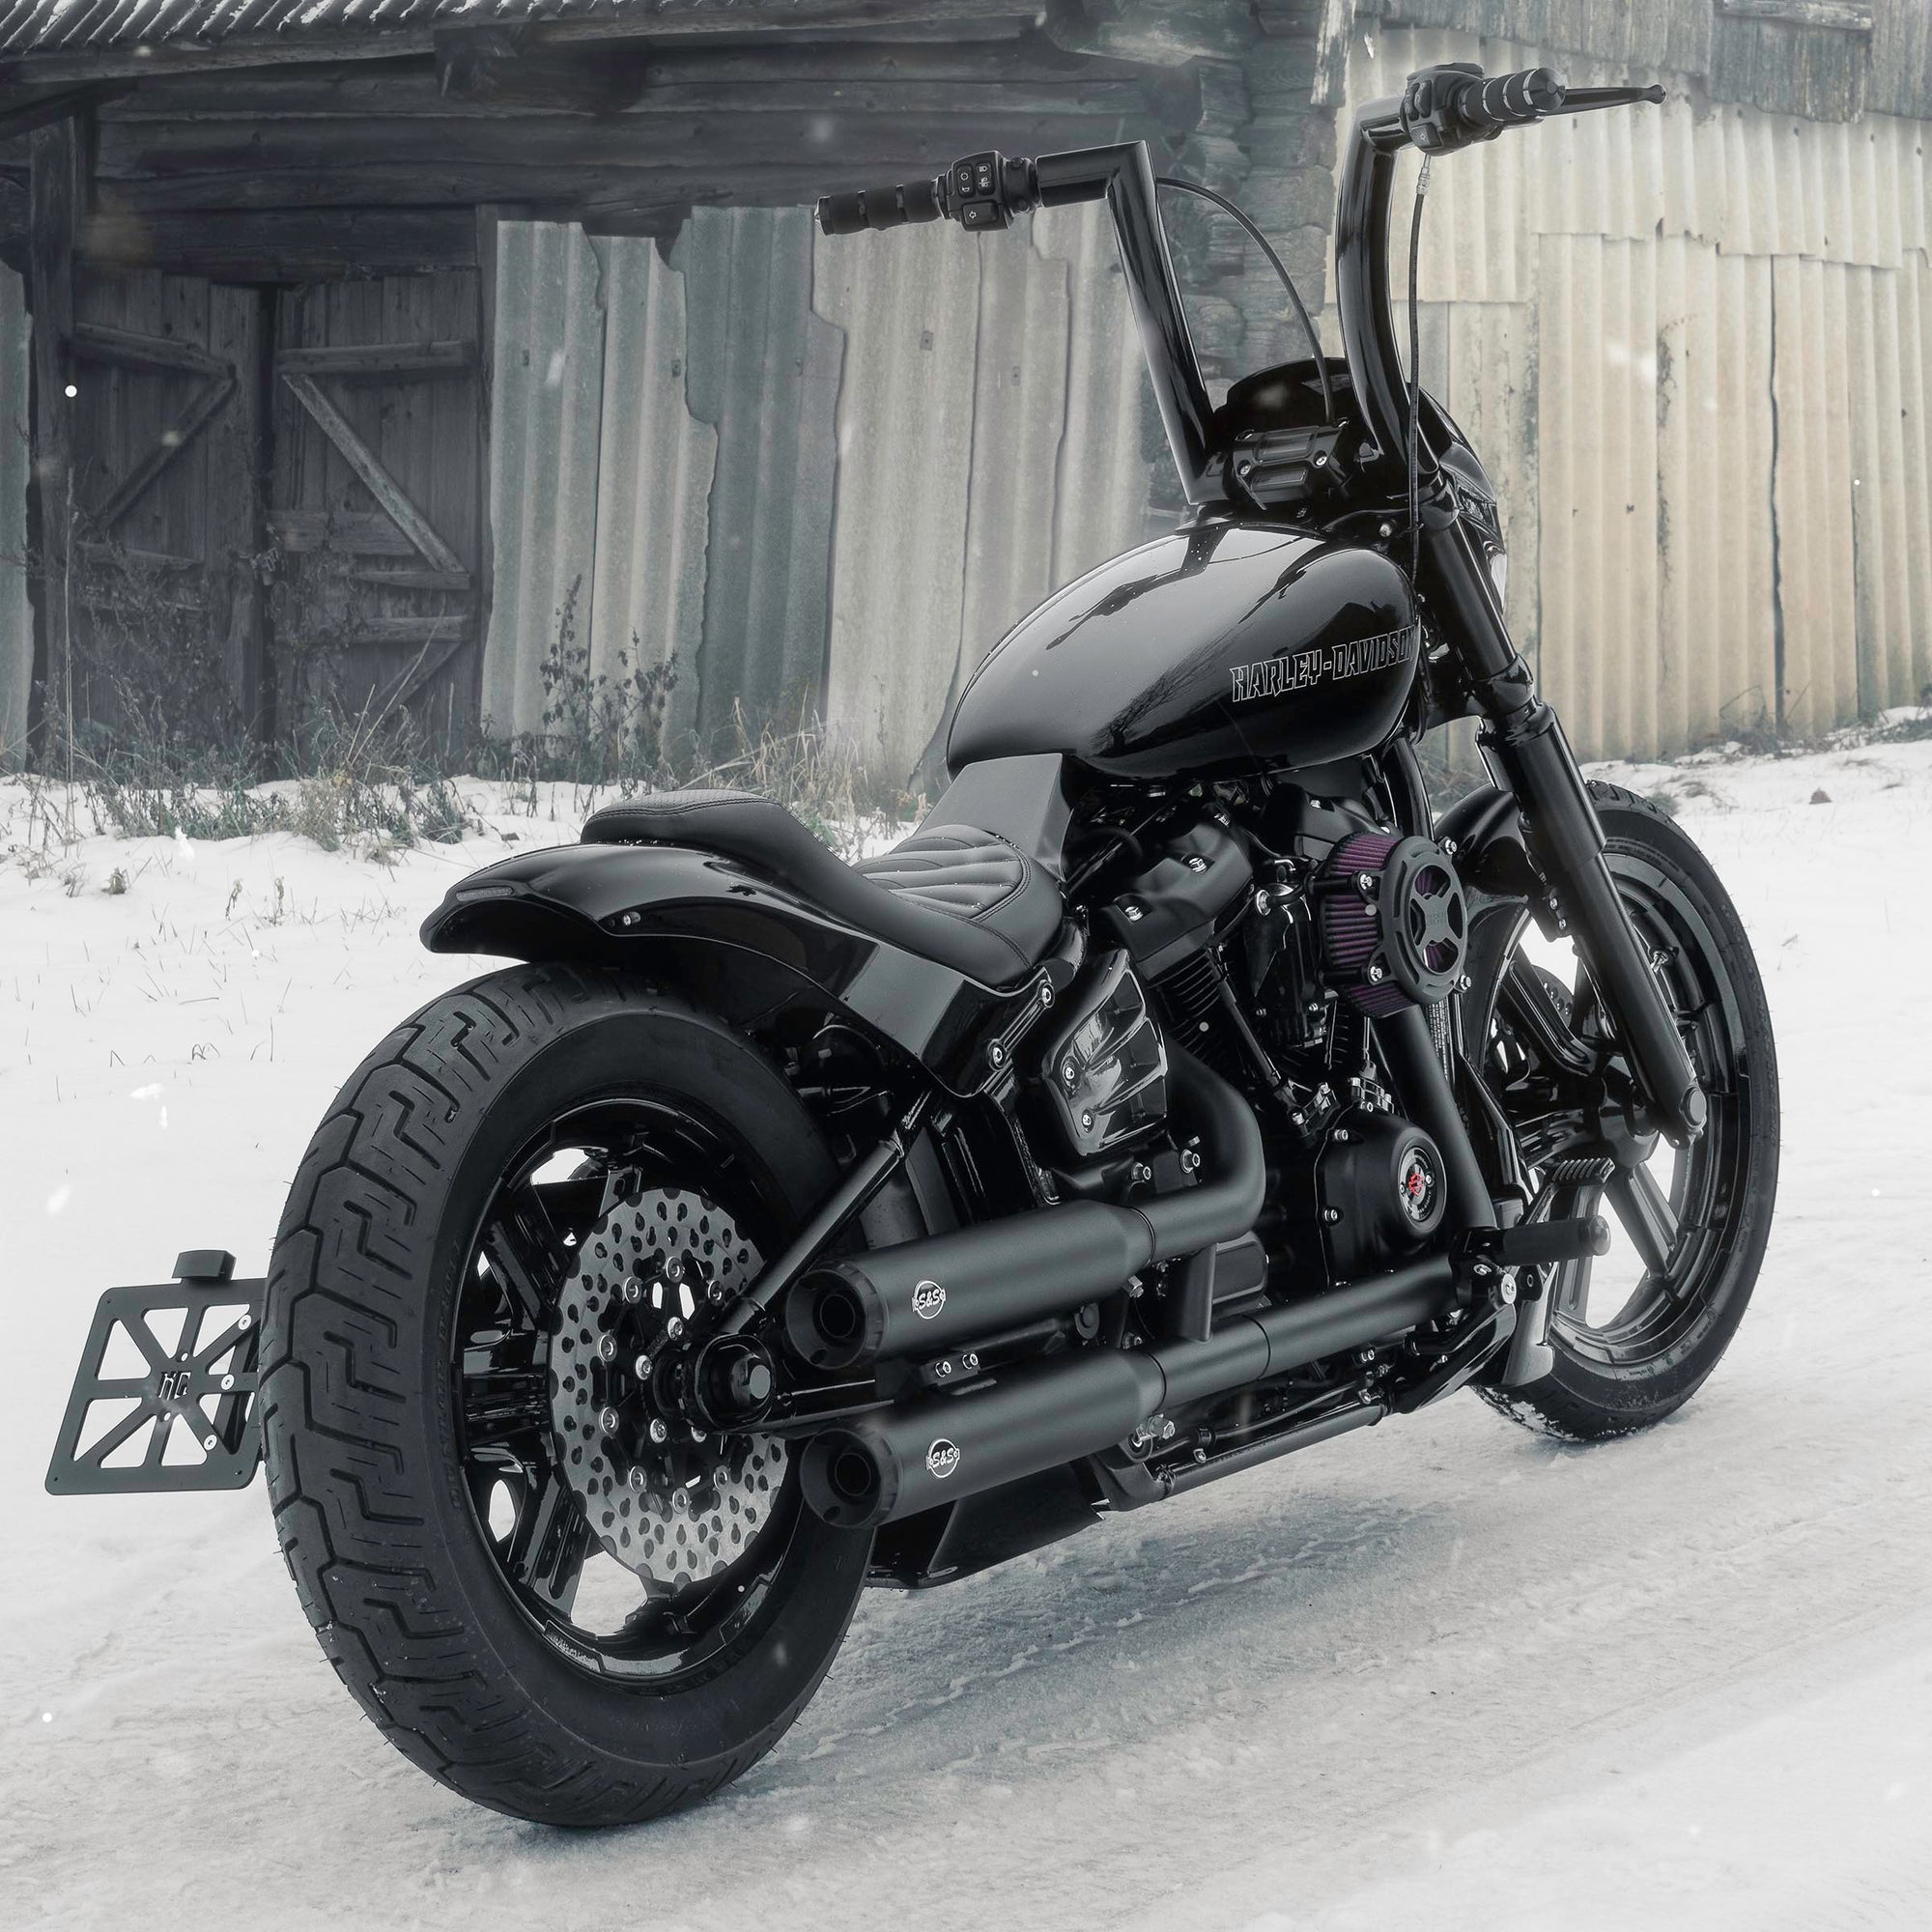 Harley Davidson motorcycle with Killer Custom parts form the rear outside on a snowy day with an abandoned shack in the background